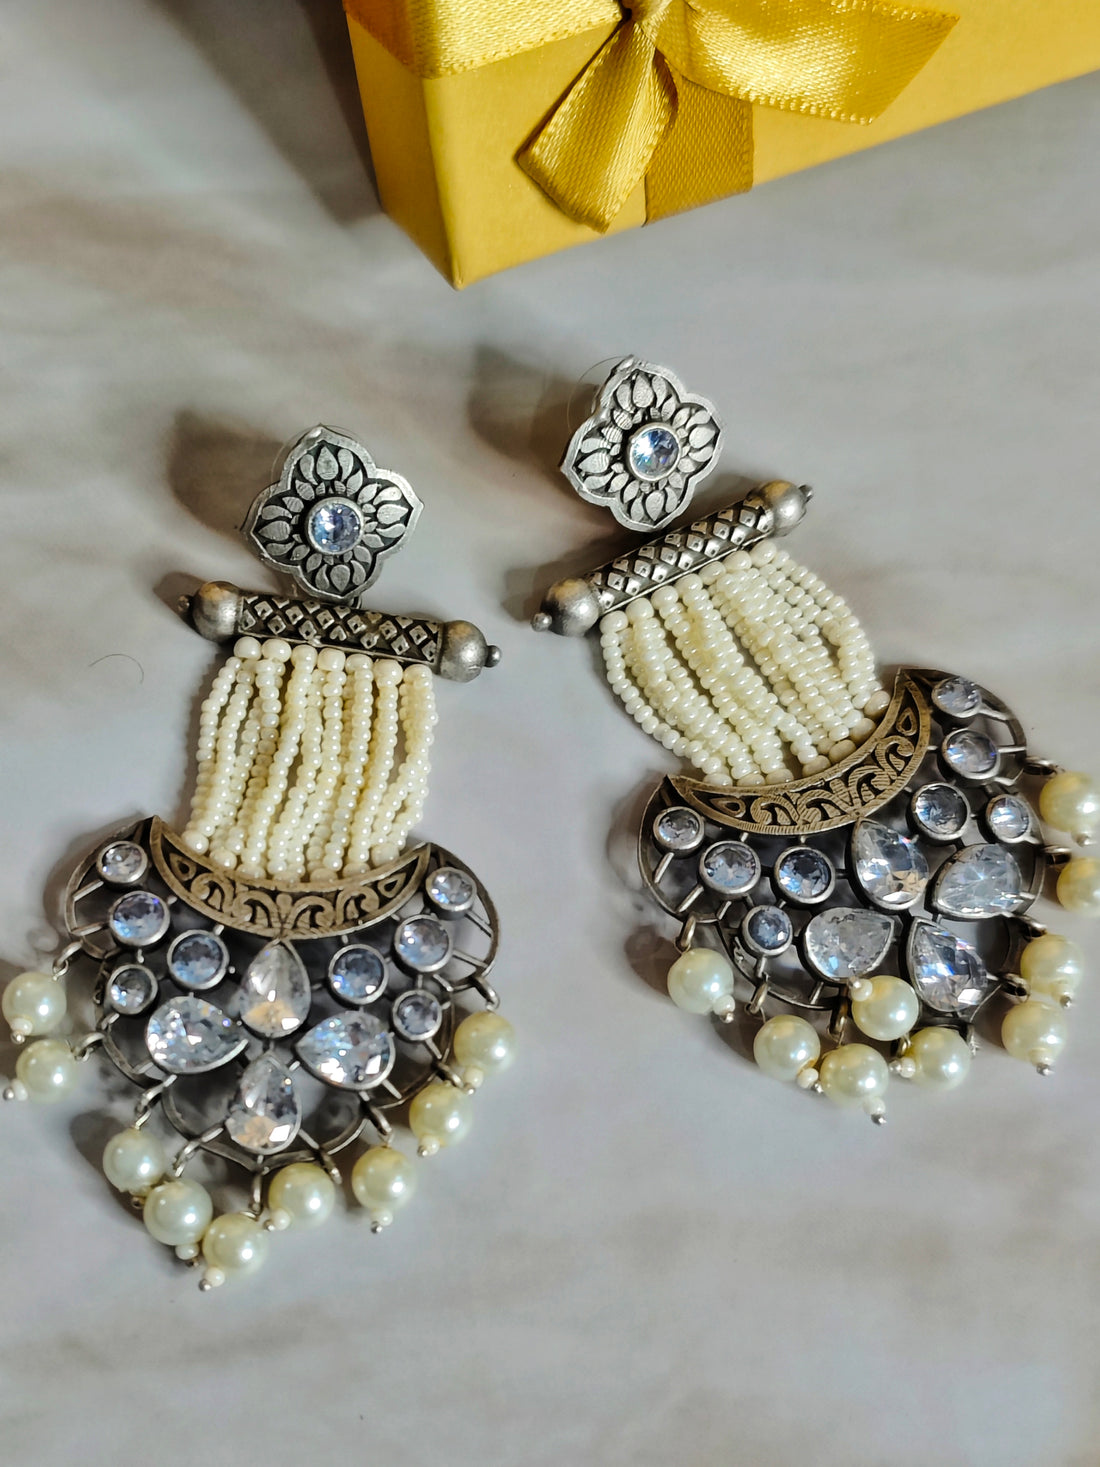 Sandarbh Pemium Jhumka from Mrigaya by Nandini is a traditional earring set for Festive Occasions & Traditional Look- Clear - Mrigaya India